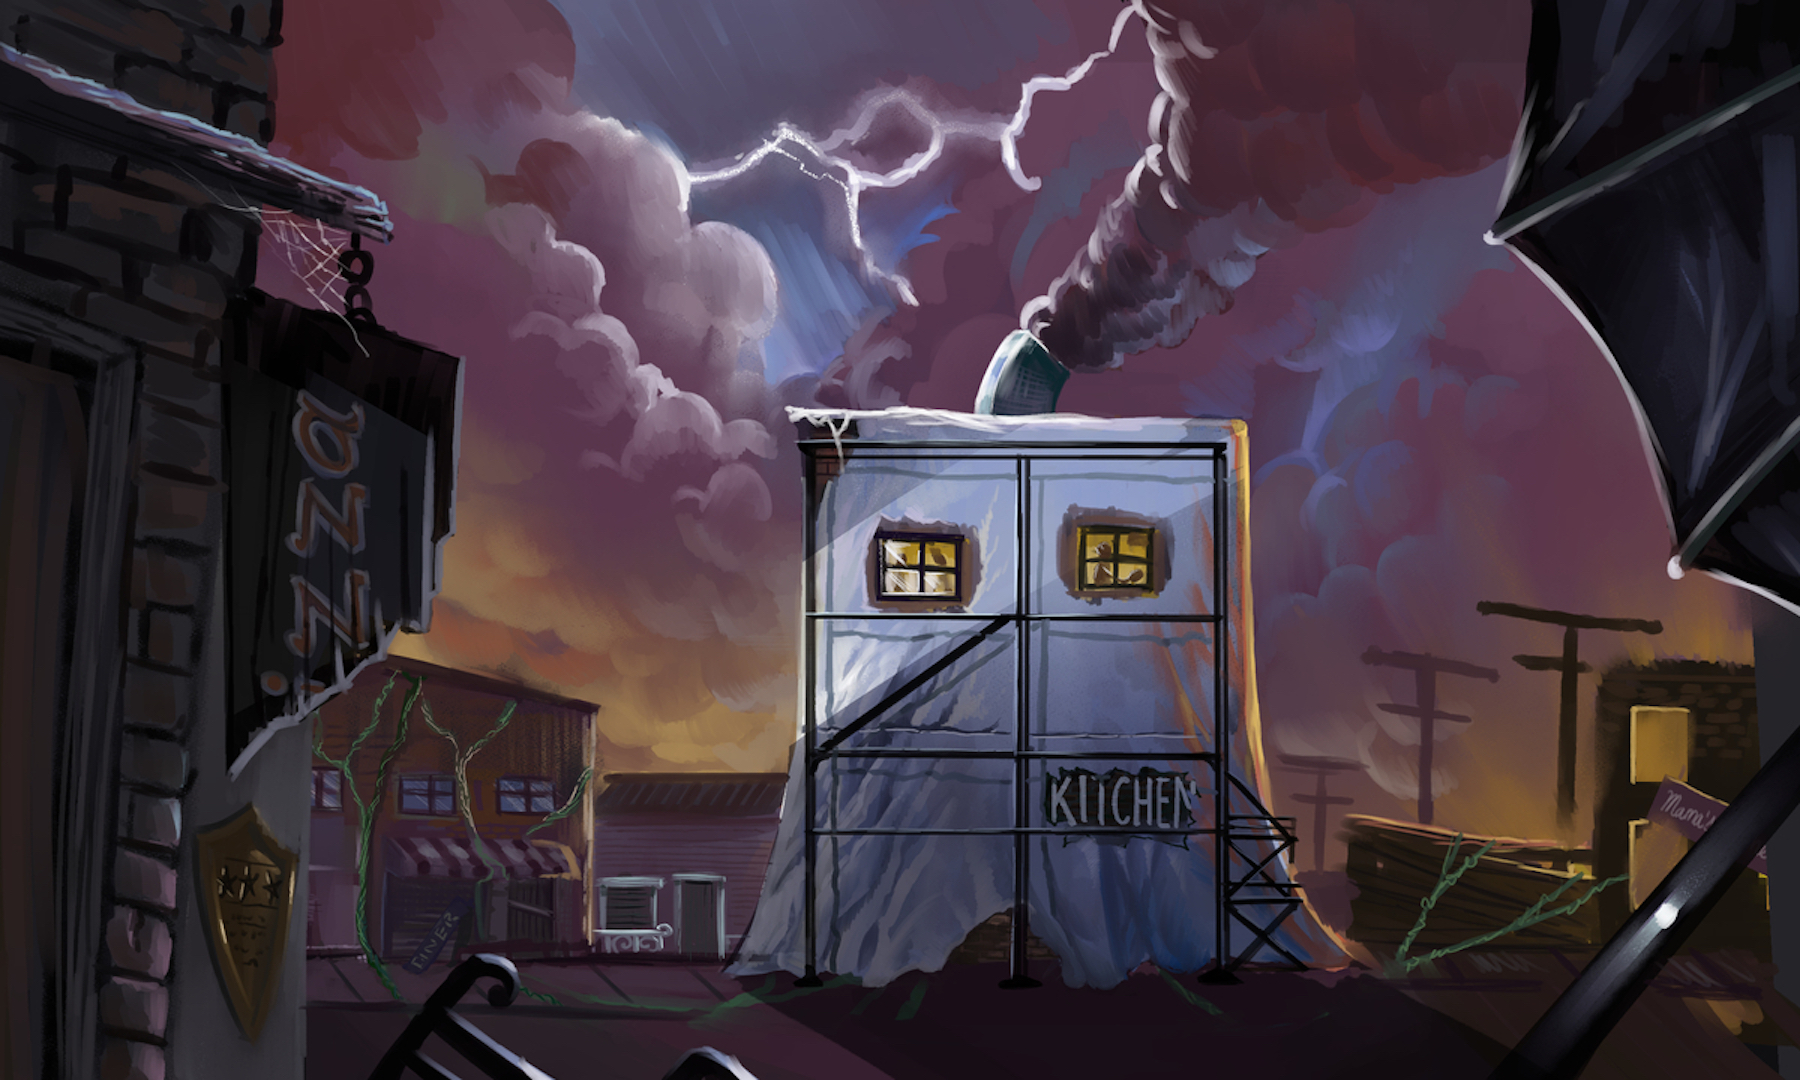 An illustration of a haunted-looking industrial kitchen with smoke coming from its chimney, surrounded by closed and broken-down restaurants.